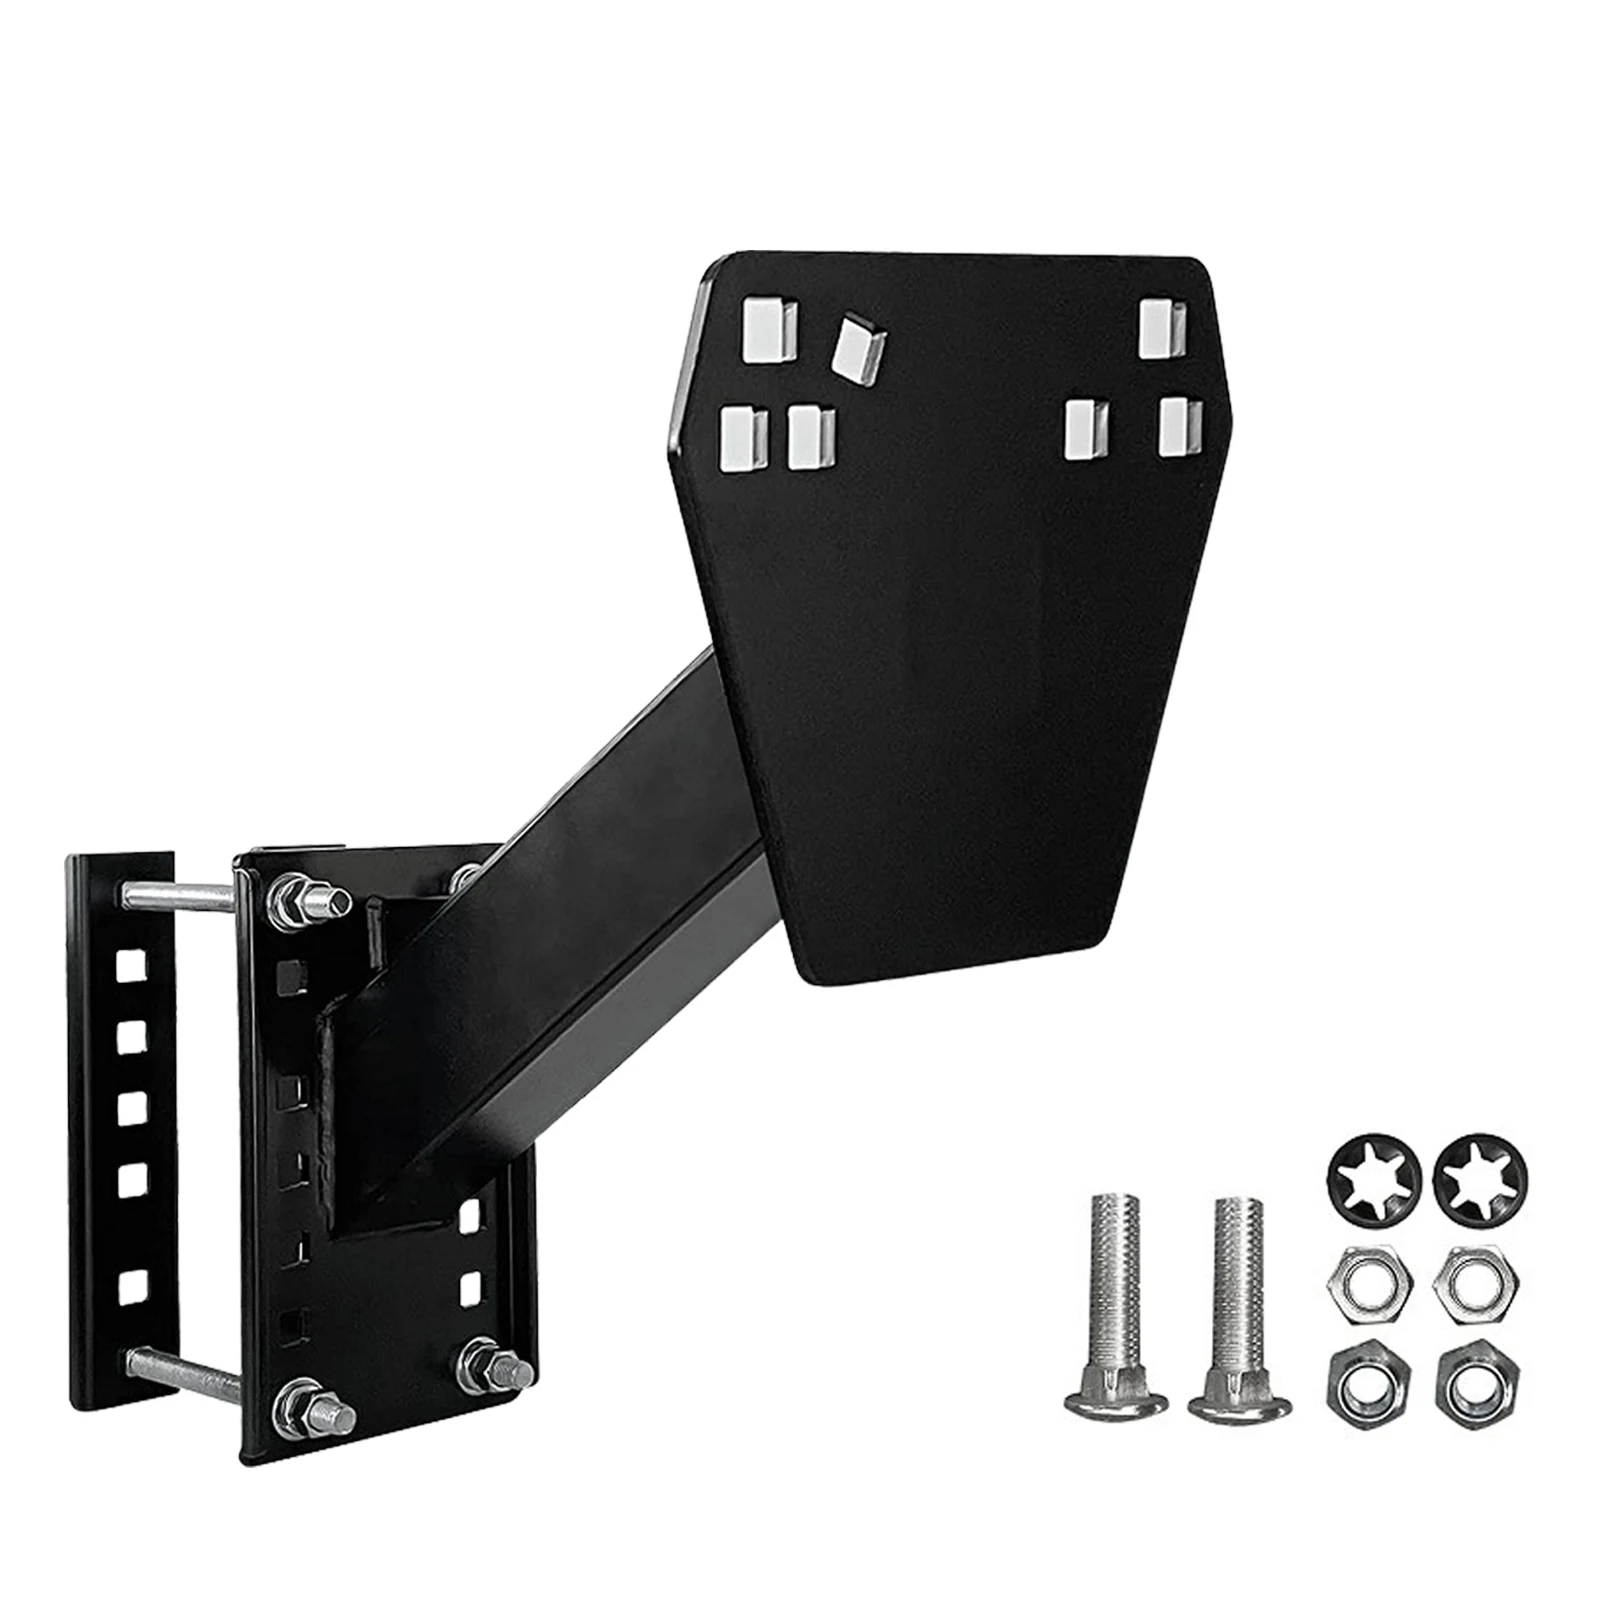 

Spare Tire Bracket For Trailer Boat Spare Tire Carrier Mount Heavy Duty Lugs Wheels Carrier 1200lbs Capacity With Bolt Patterns